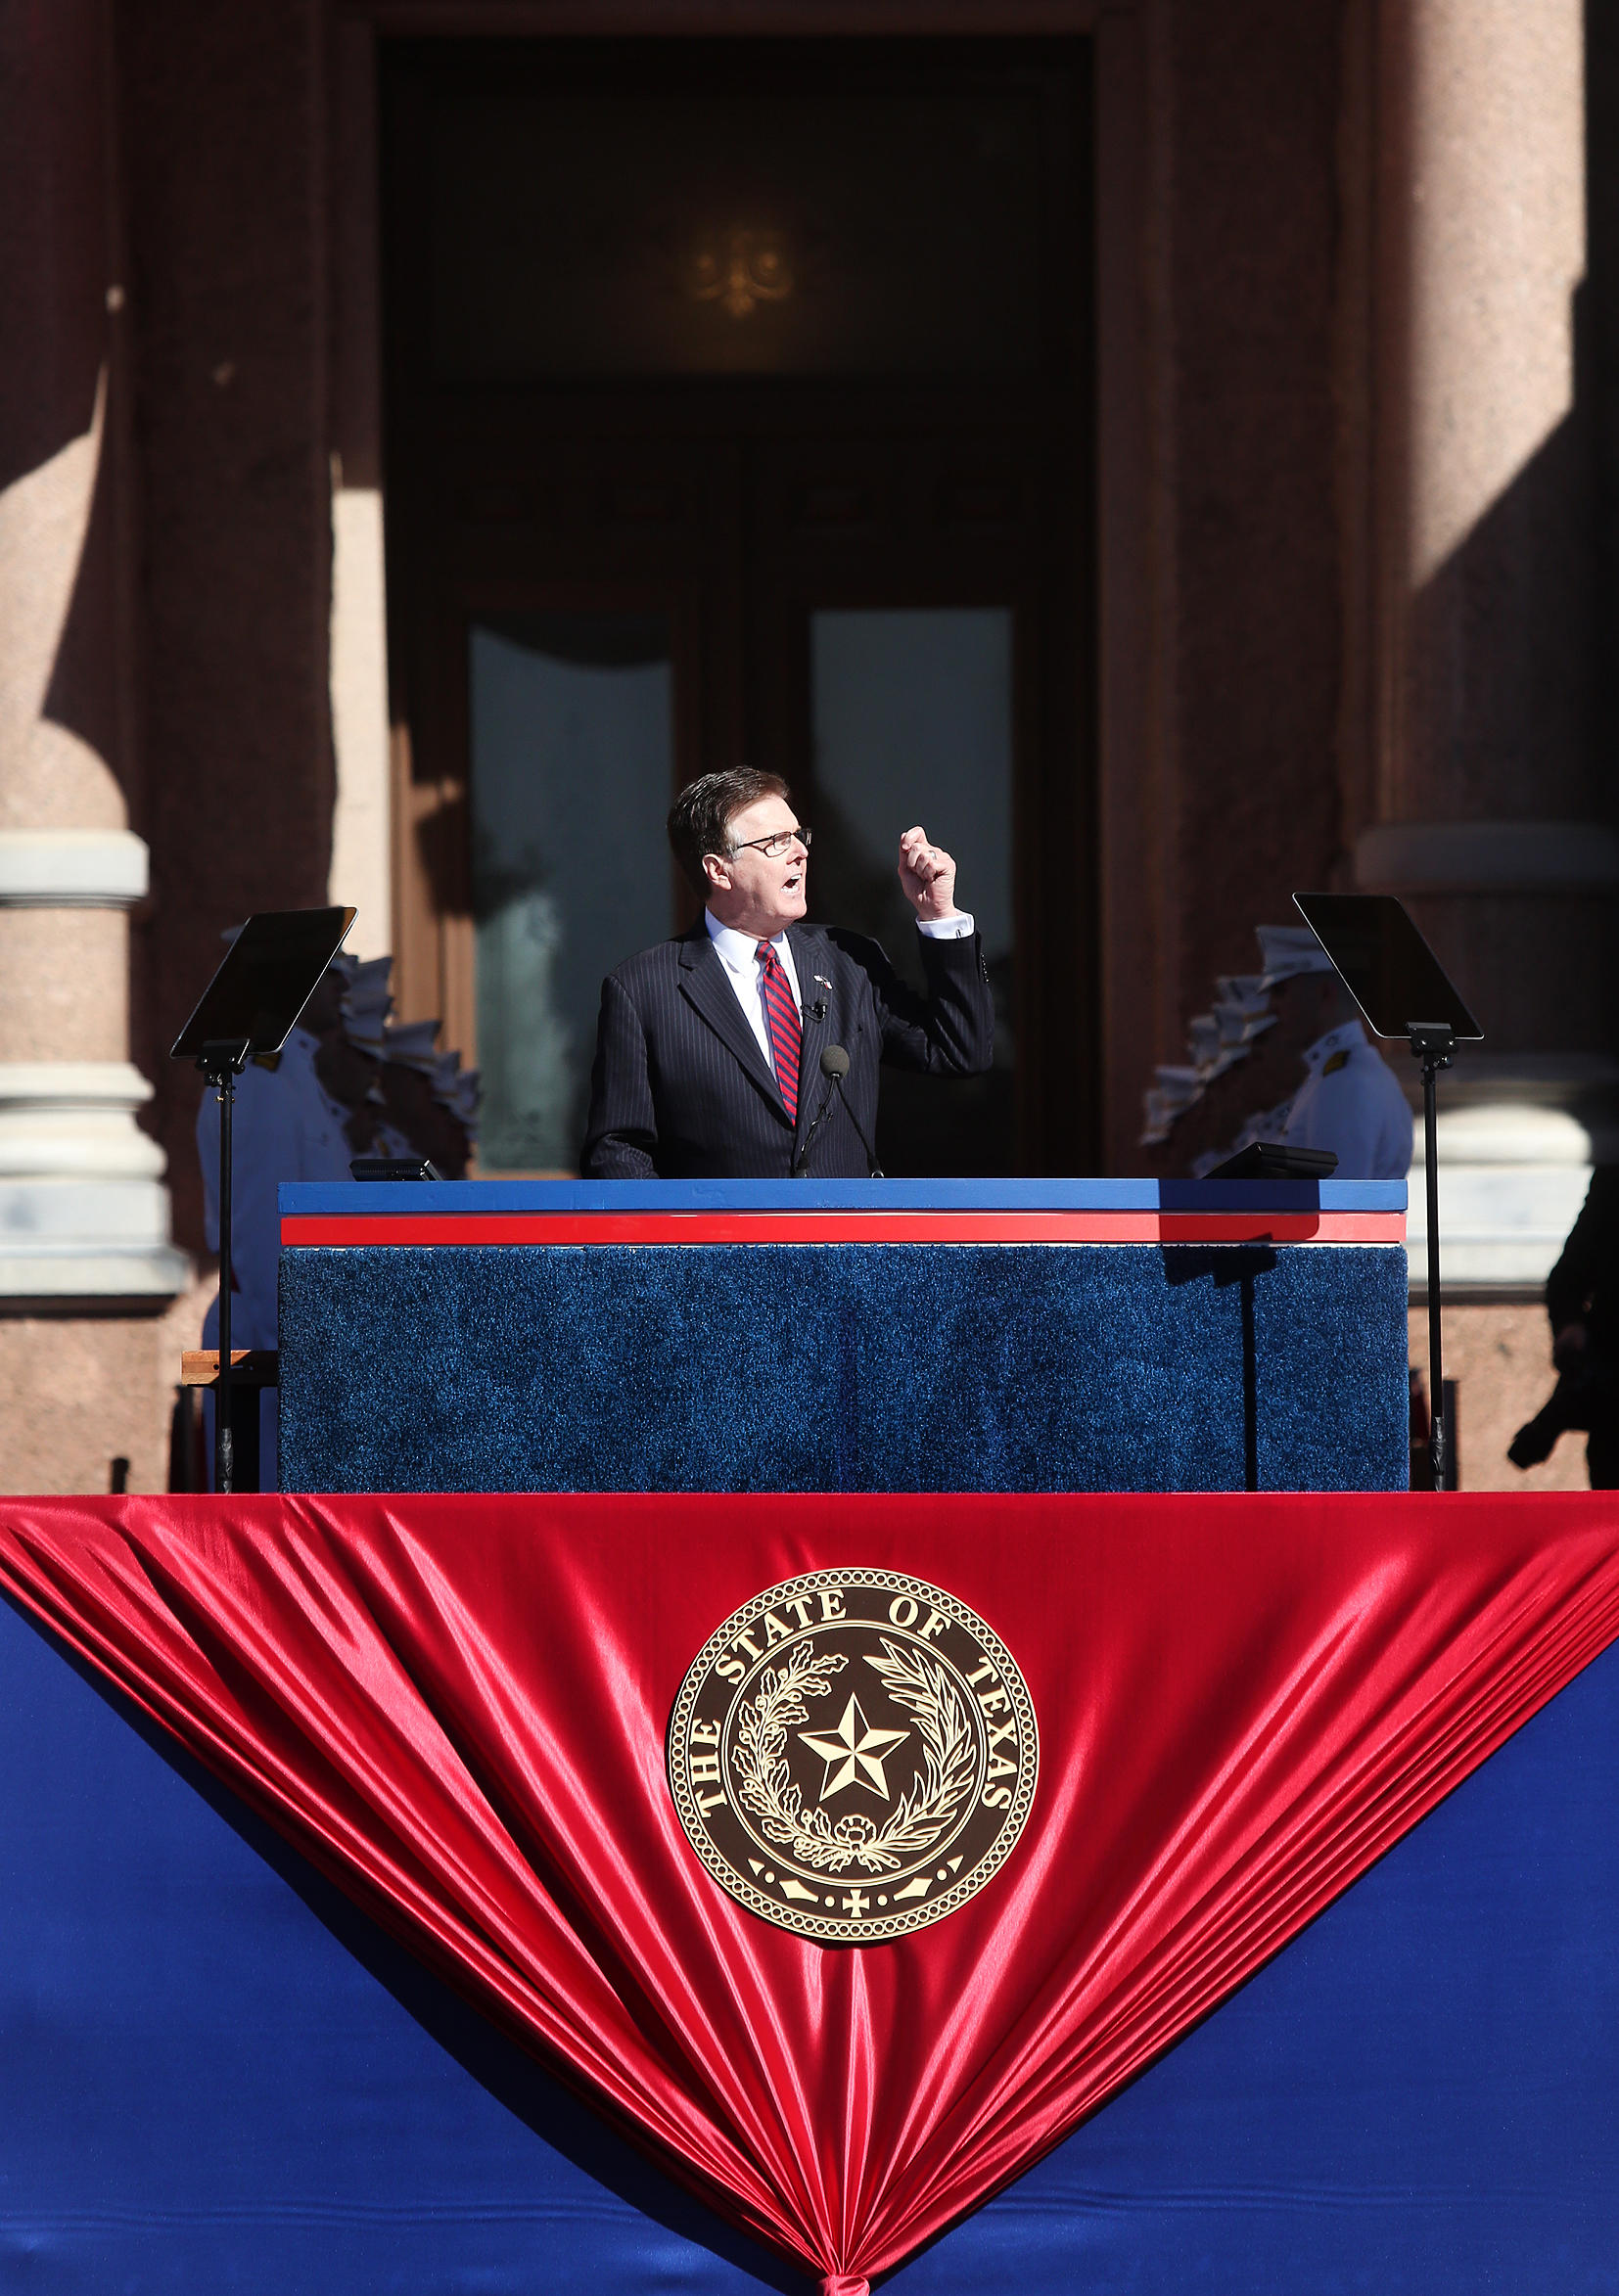 Texas' New Leaders Strike Different Tones With Inaugural Speeches KUT